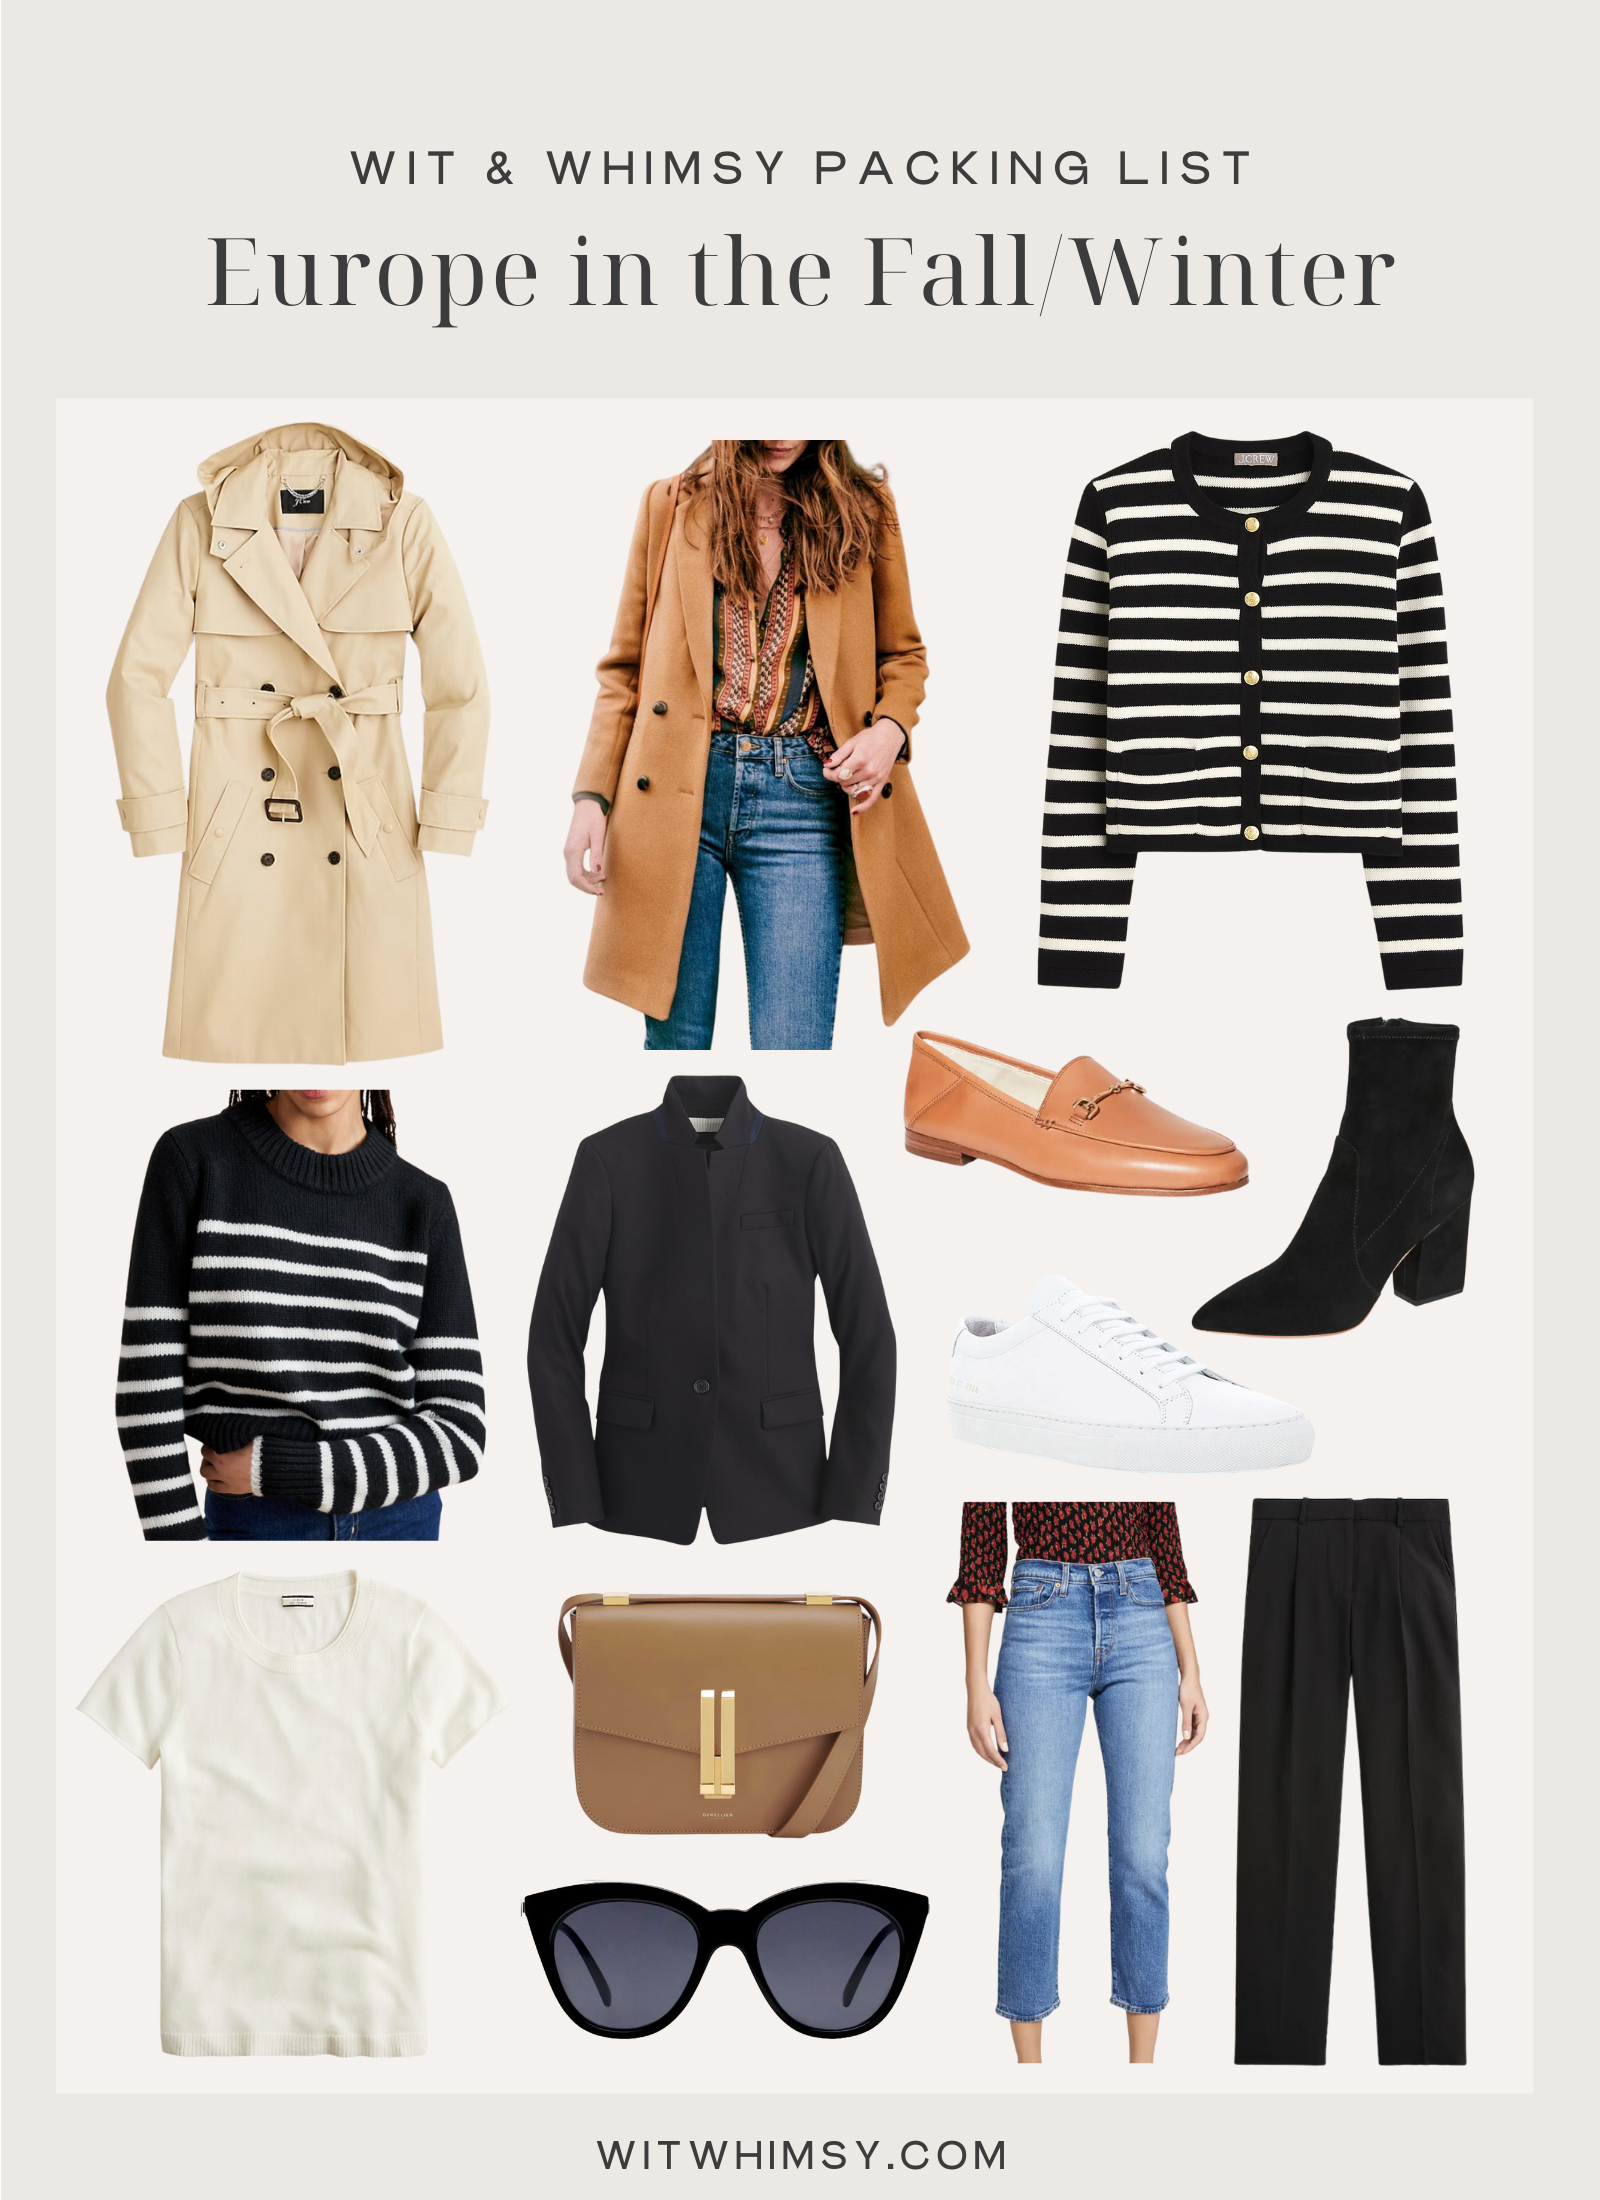 Collage of clothes and accessories to pack for a trip to Europe in the Fall or Winter